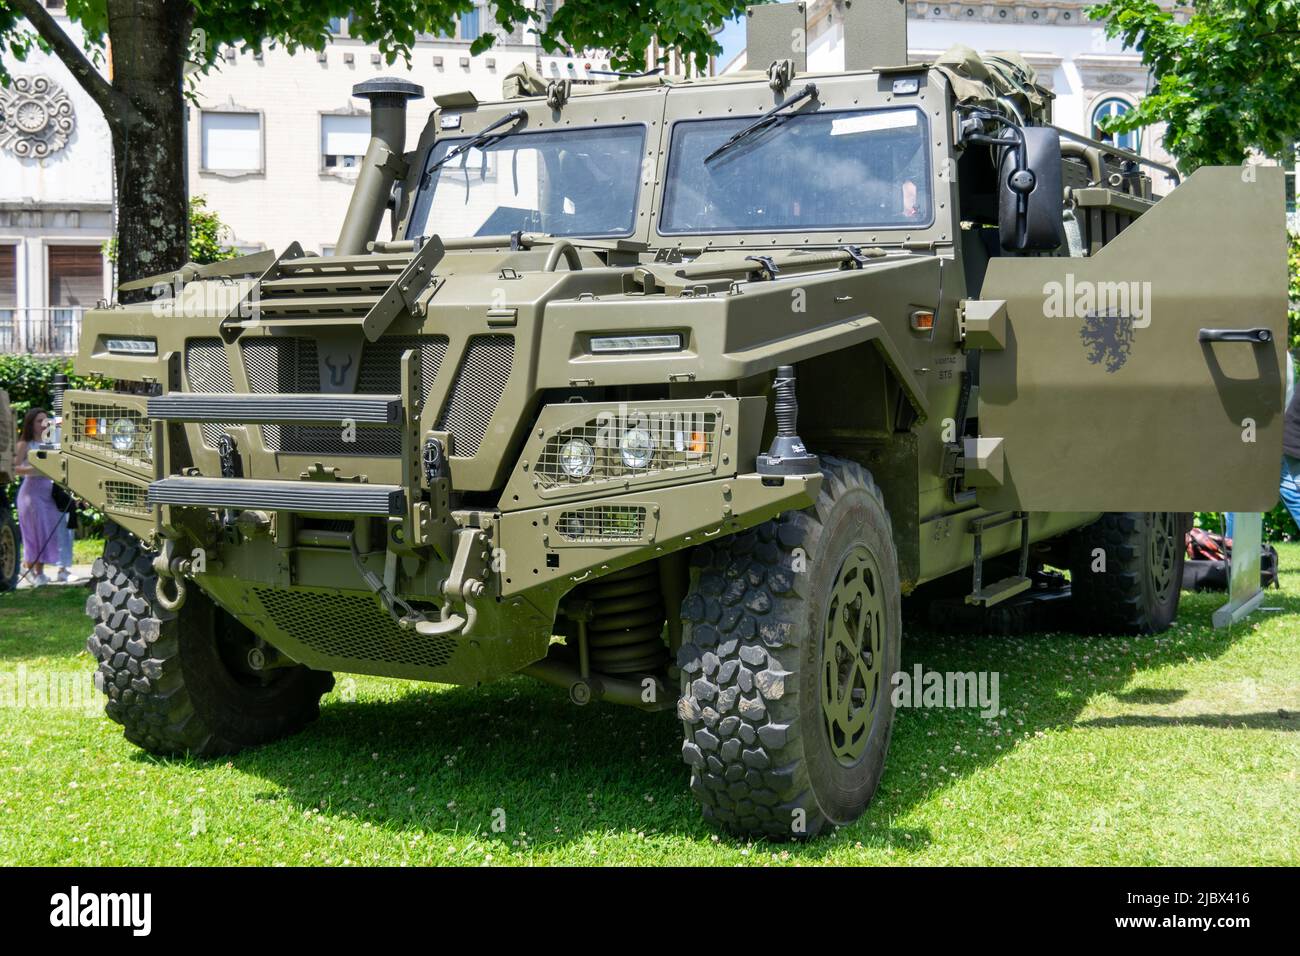 VAMTAC ST5, tactical operations vehicles. Special troops, Nato Forces. Portuguese army equipment. Armored vehicles used on war zones. Armed forces. Stock Photo